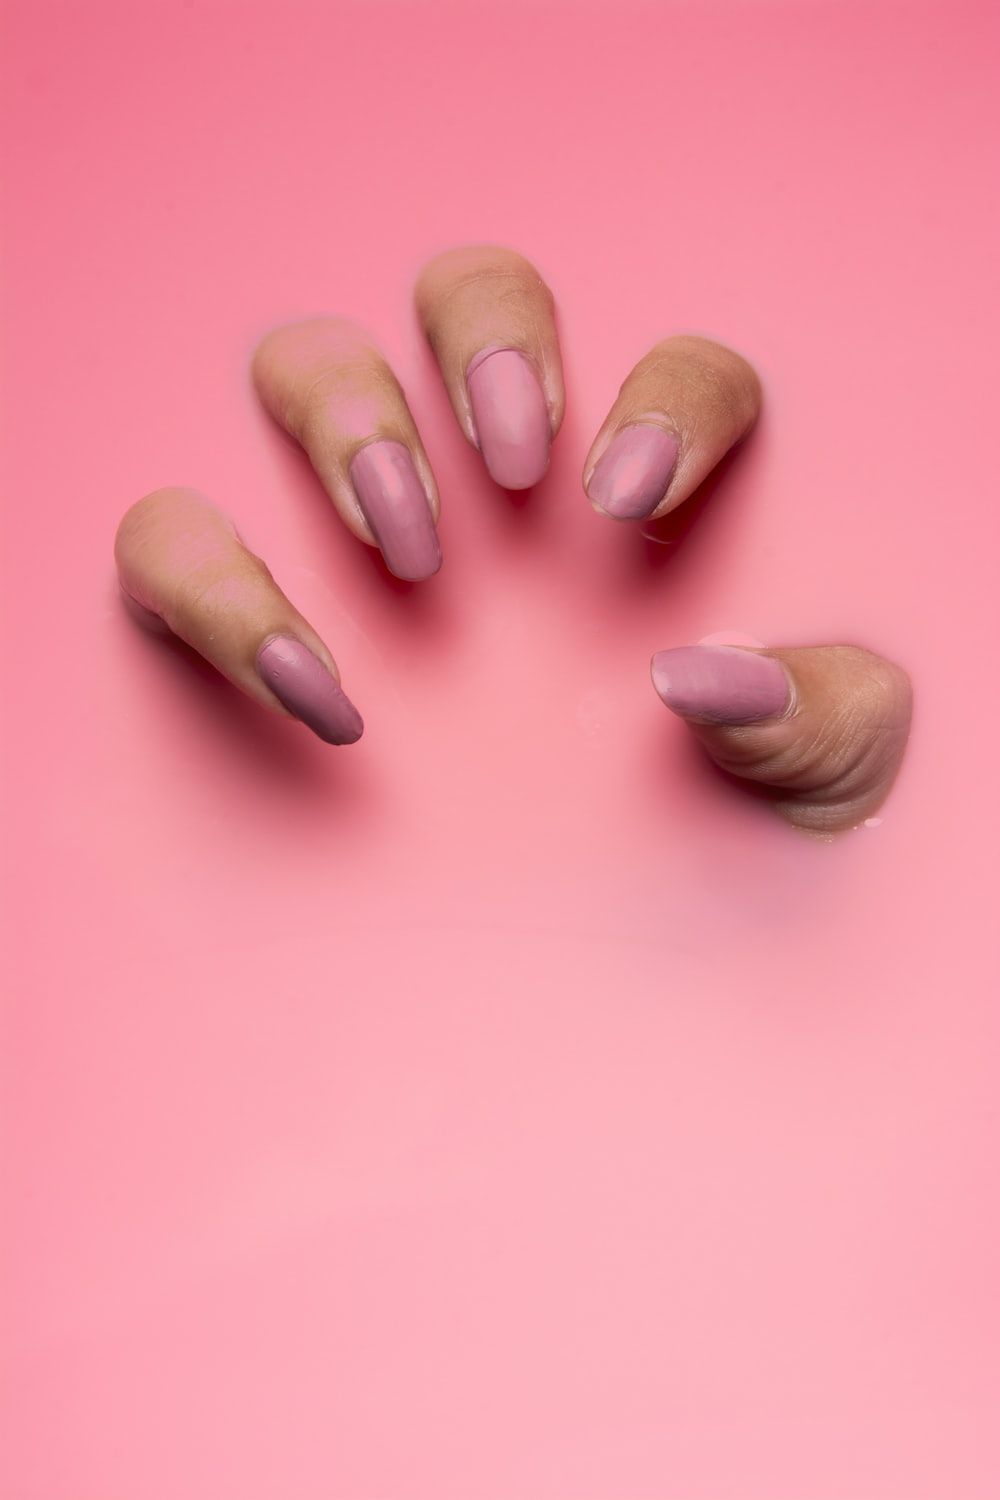 Acrylic Nails Picture. Download Free Image